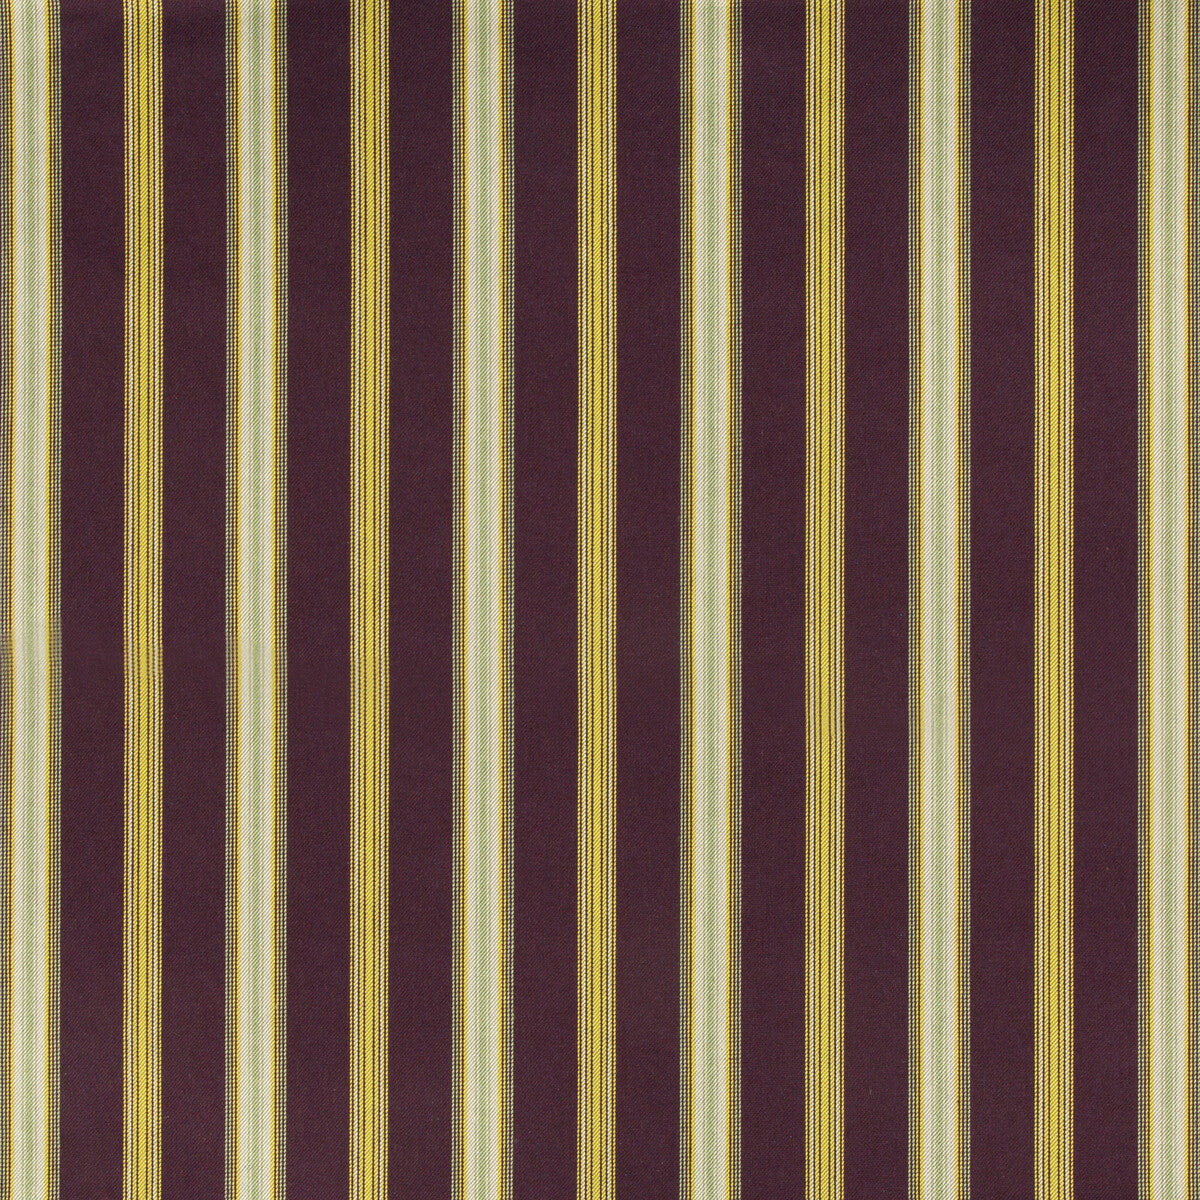 Canfield Stripe fabric in aubergine color - pattern BFC-3670.909.0 - by Lee Jofa in the Blithfield collection